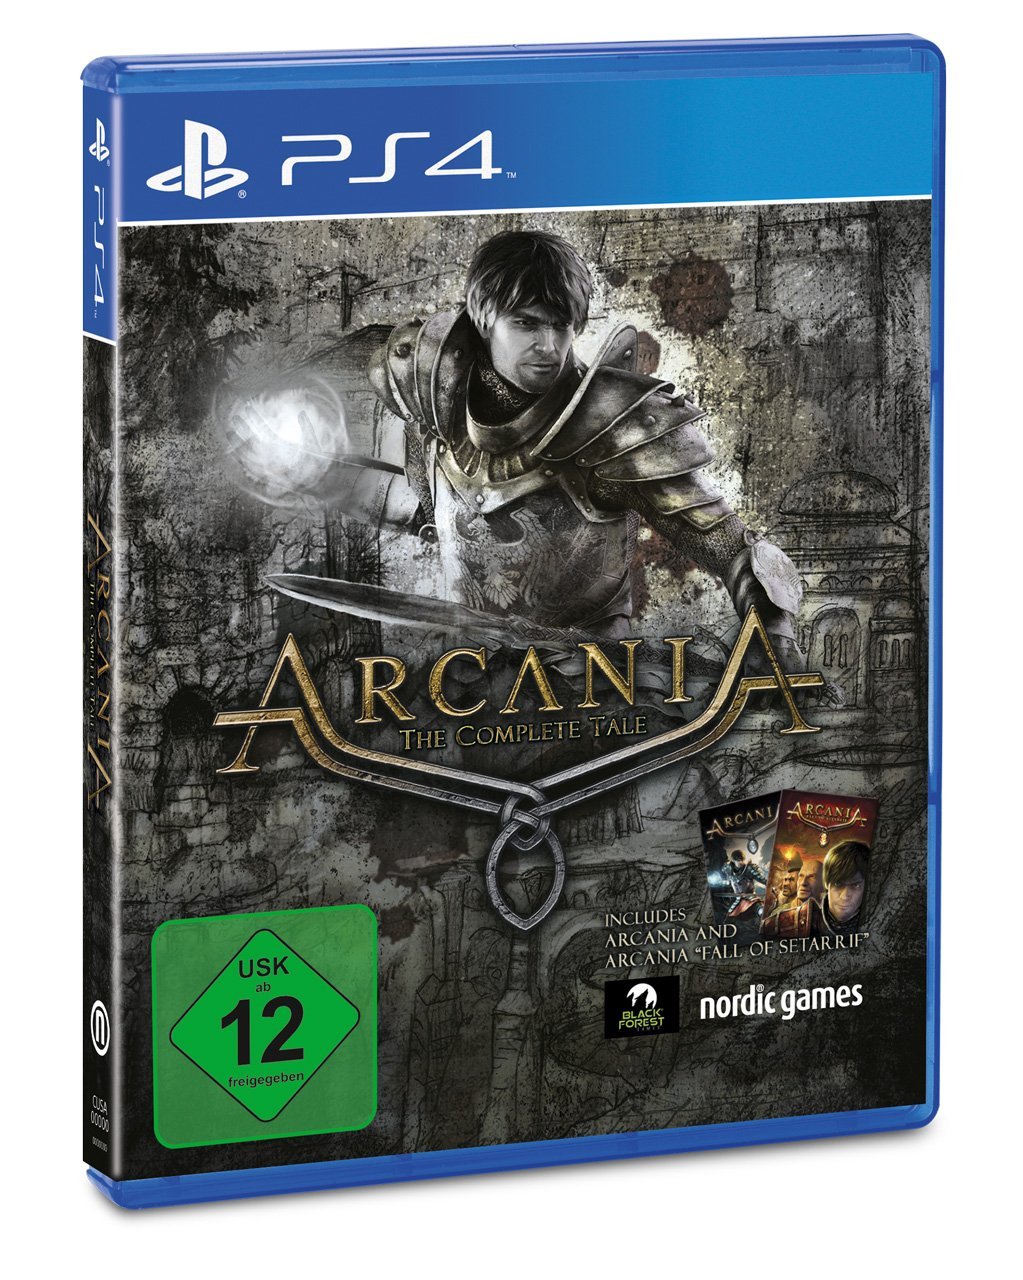 Arcania: The Tale Headed to PS4, Leaves Gothic Name Out